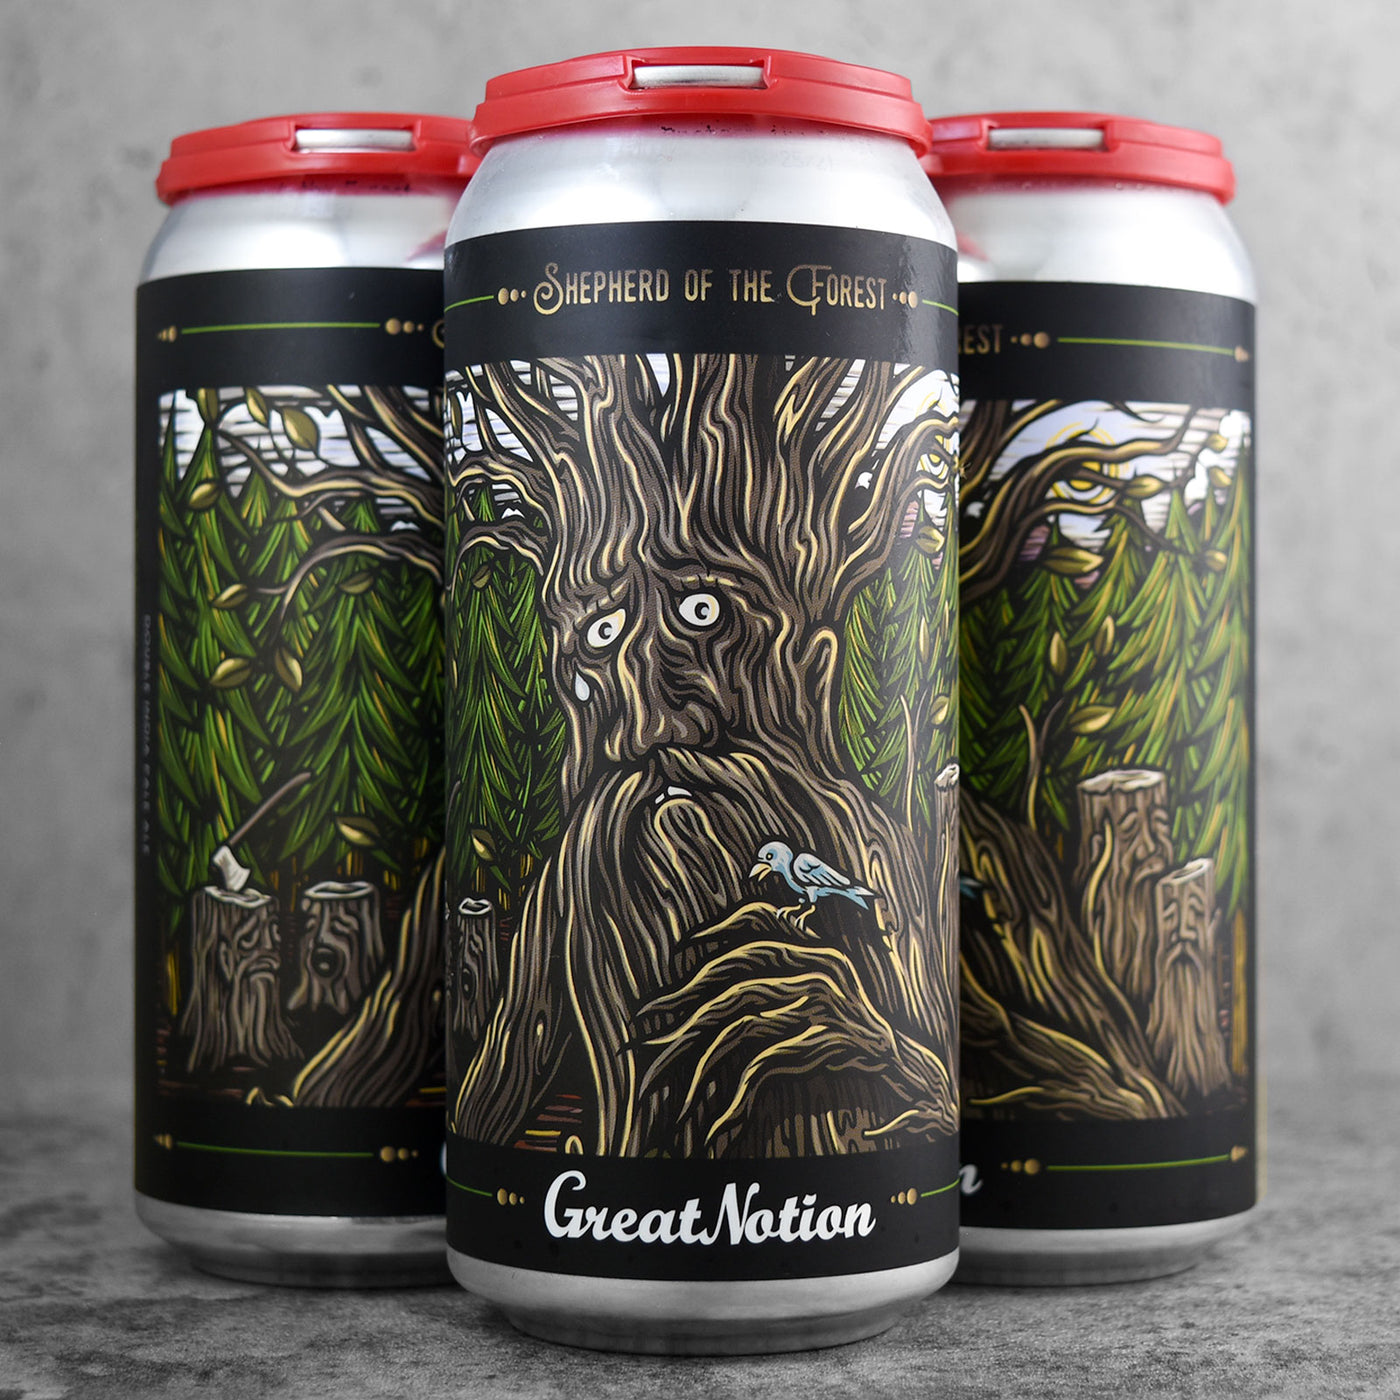 Great Notion Shepherd of the Forest